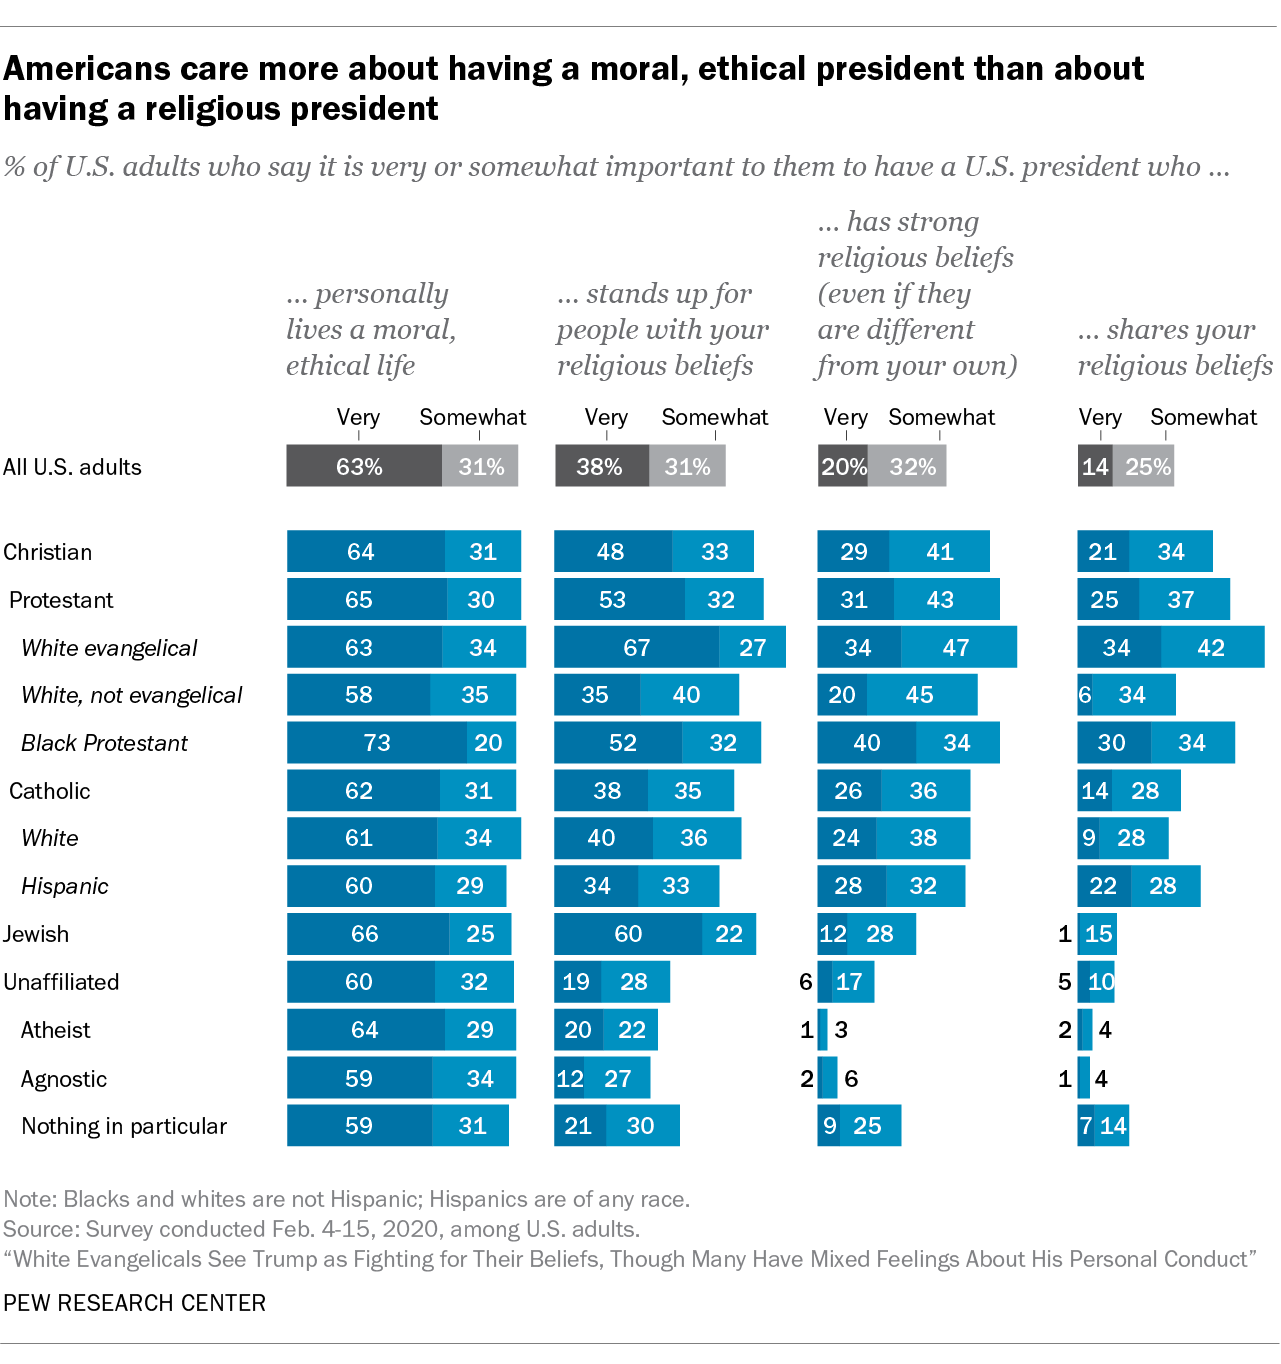 Americans care more about having a moral, ethical president than about having a religious president